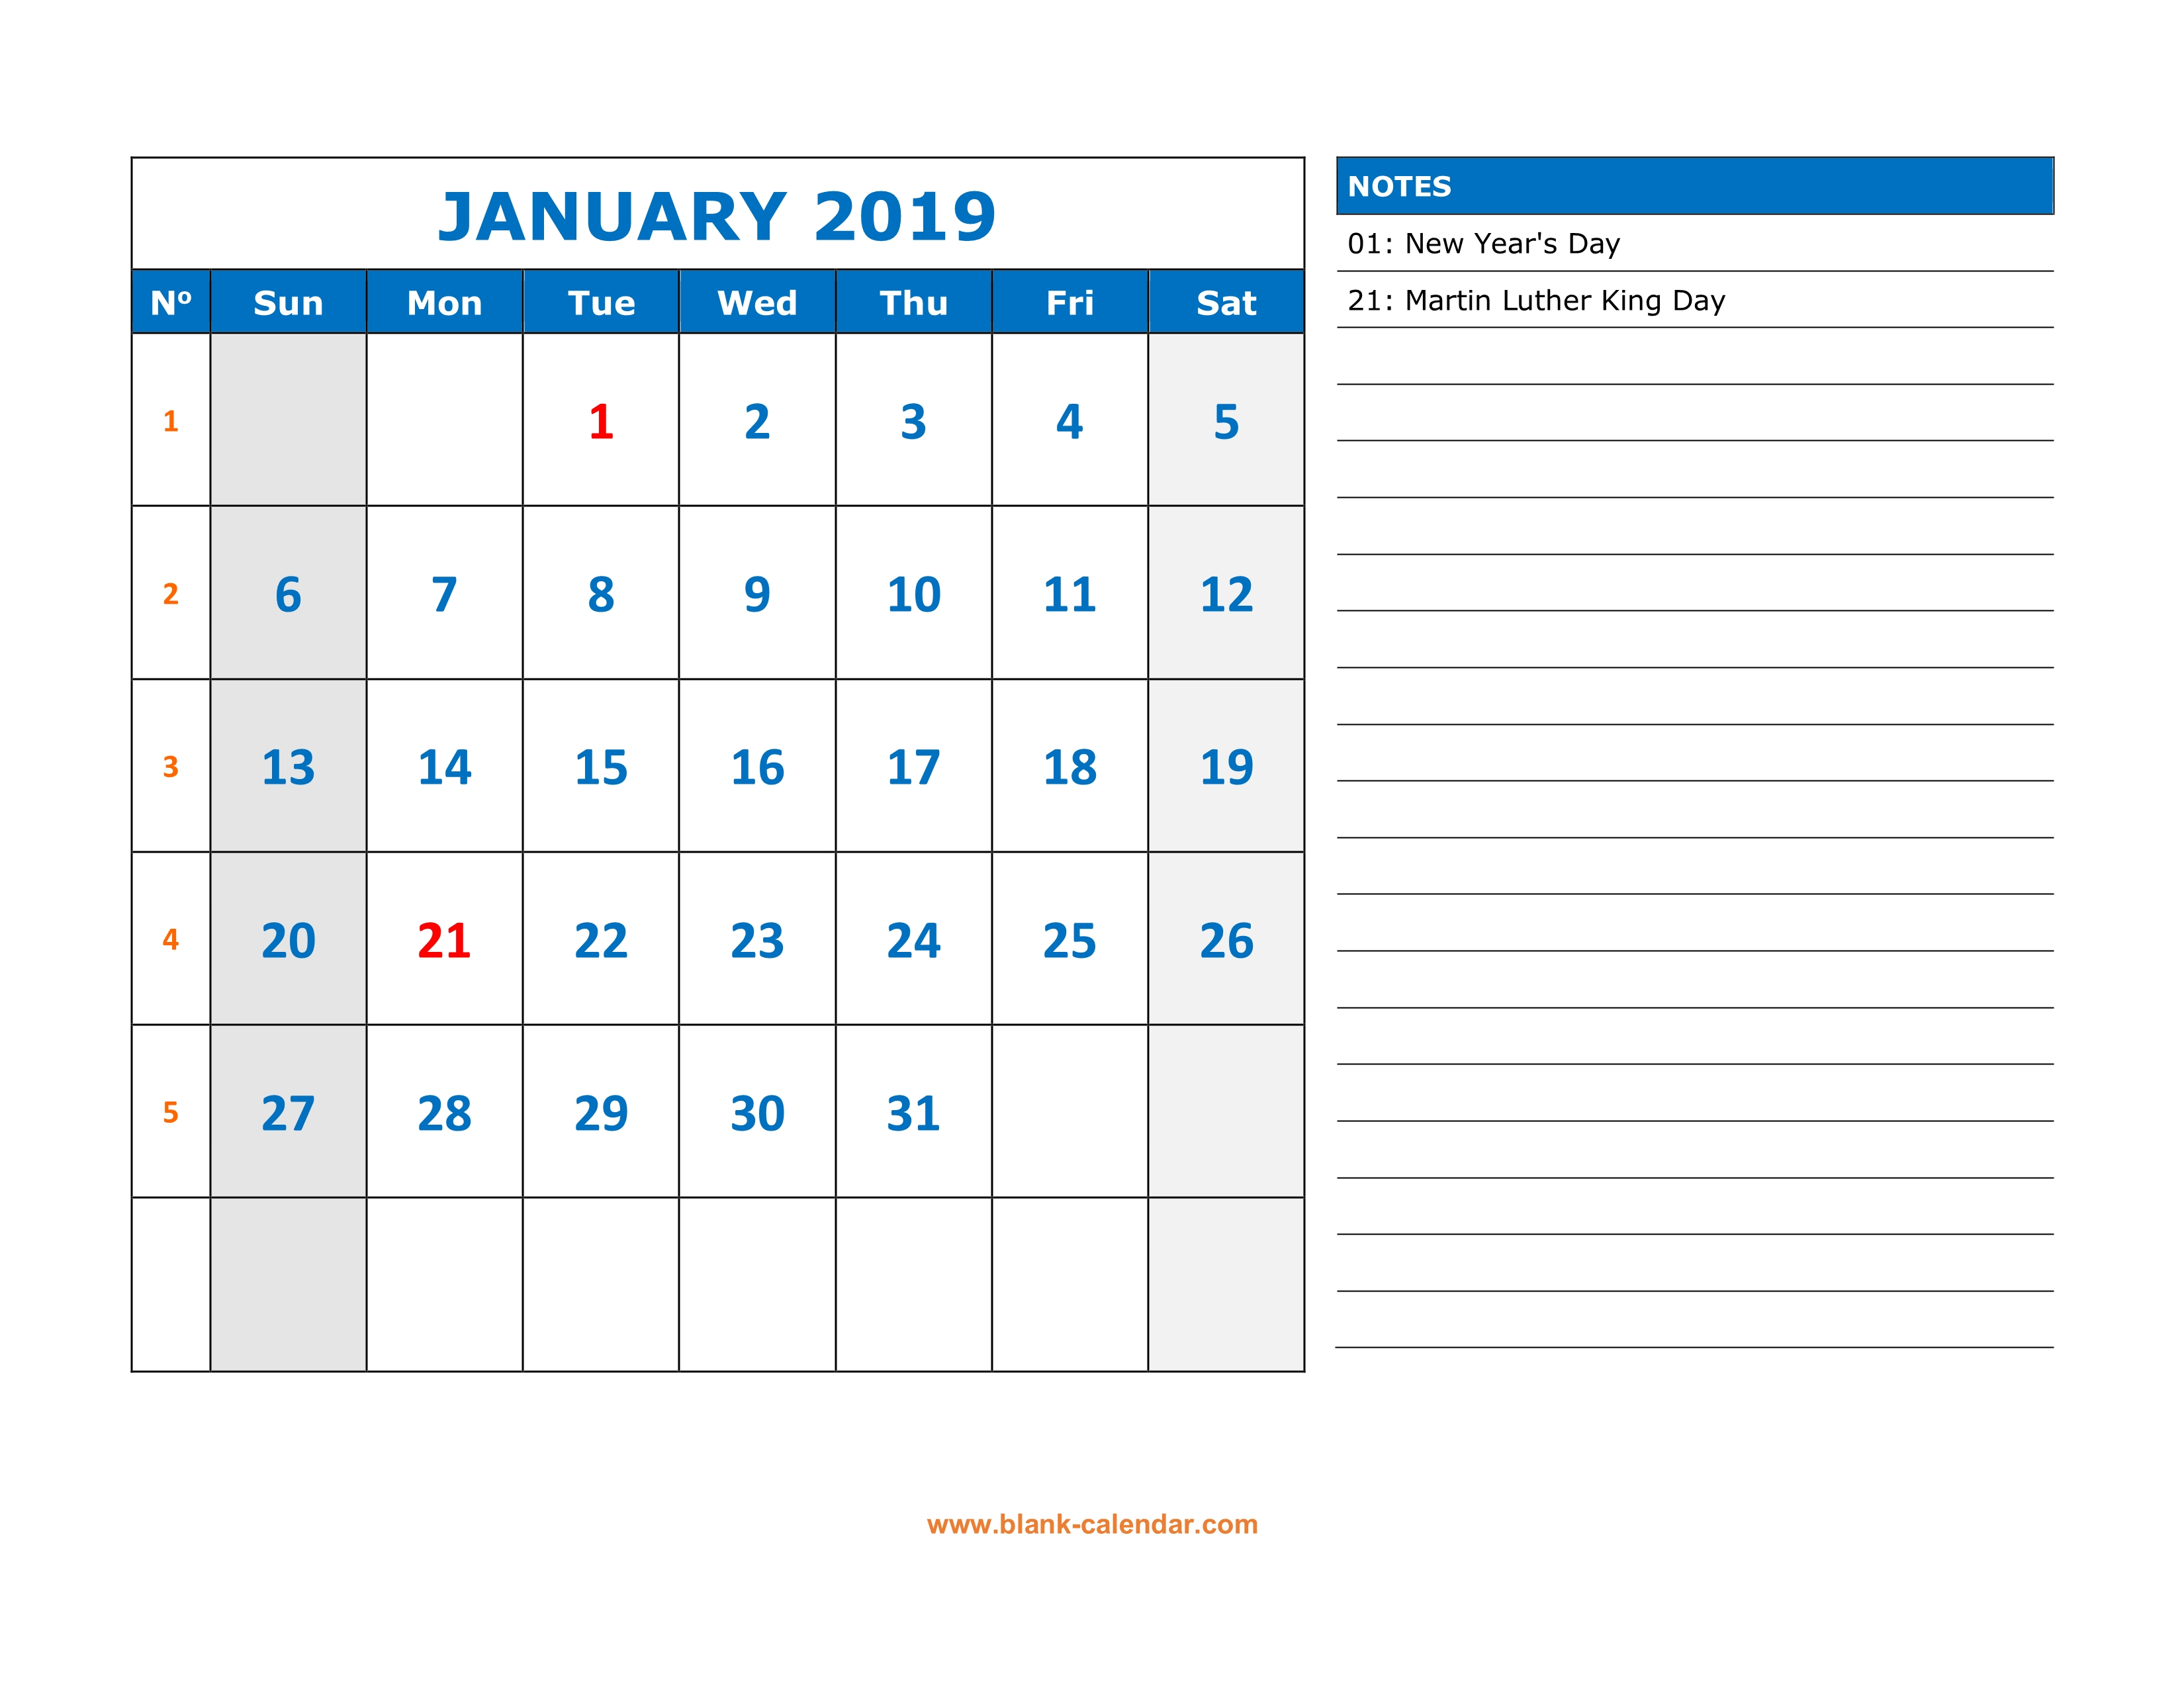 Appointment Spreadsheet Free Intended For Free Download Printable Calendar 2019, Large Space For Appointment